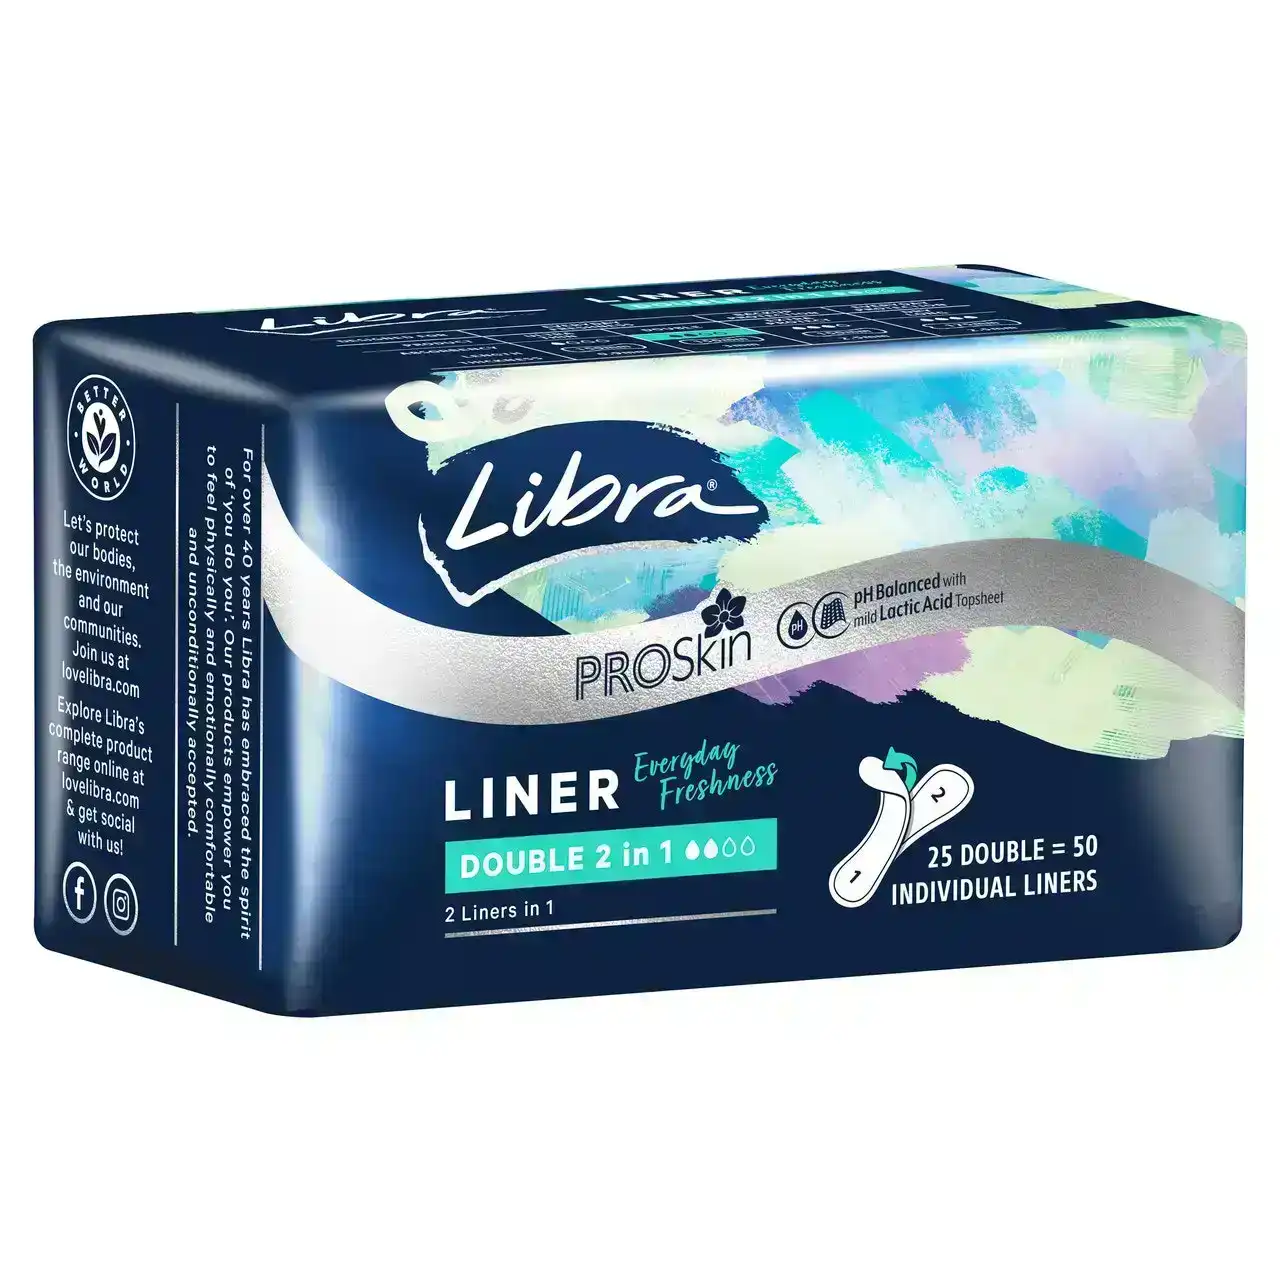 Libra Double 2 in 1 Liners 25 Pack